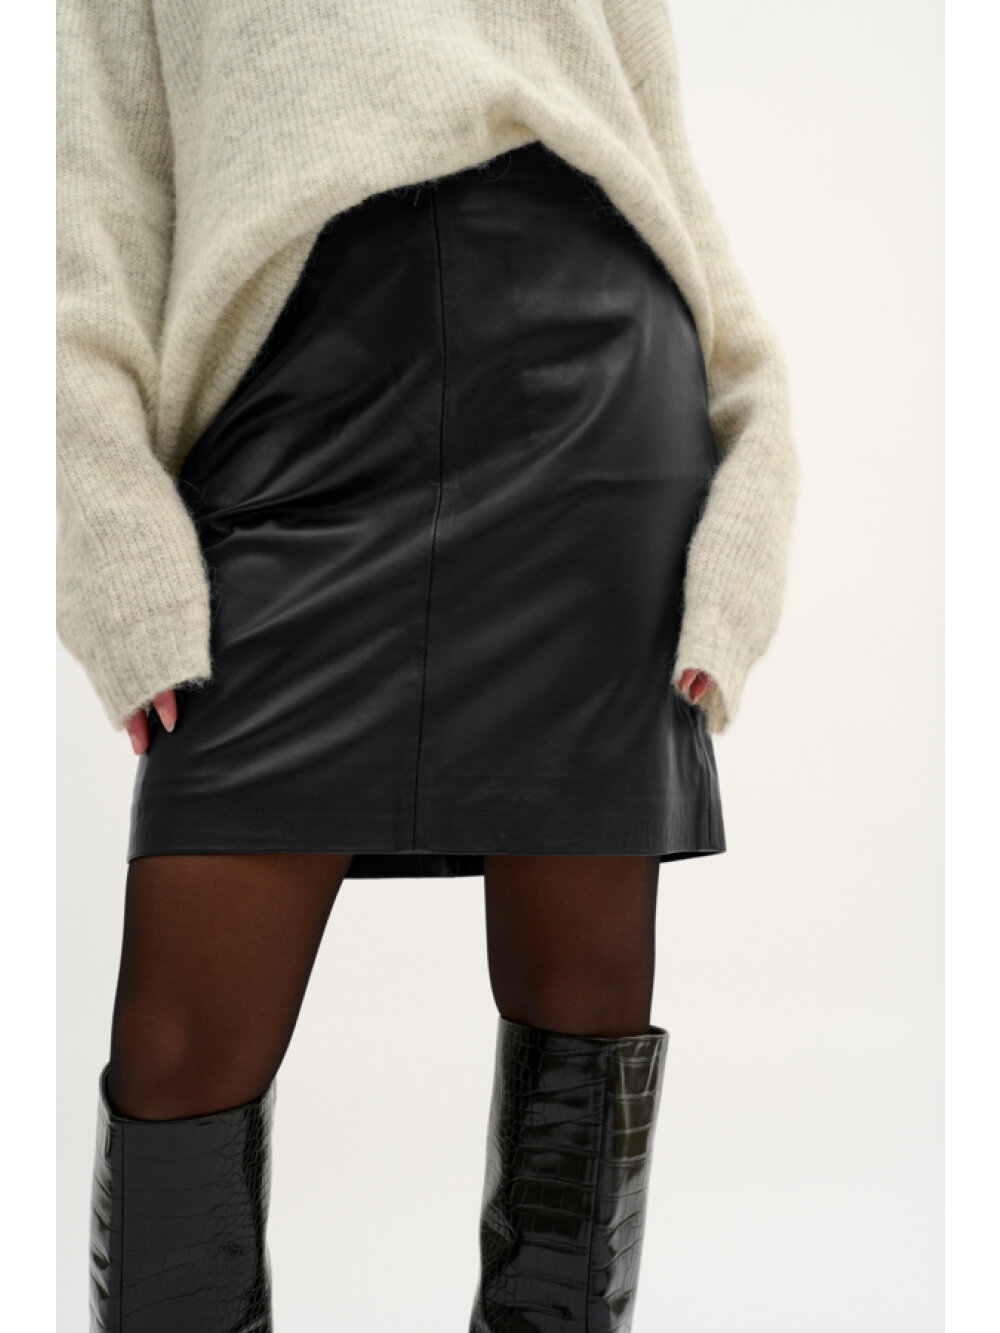 My Essential Wardrobe - 19 THE LEATHER SKIRT Nederdel